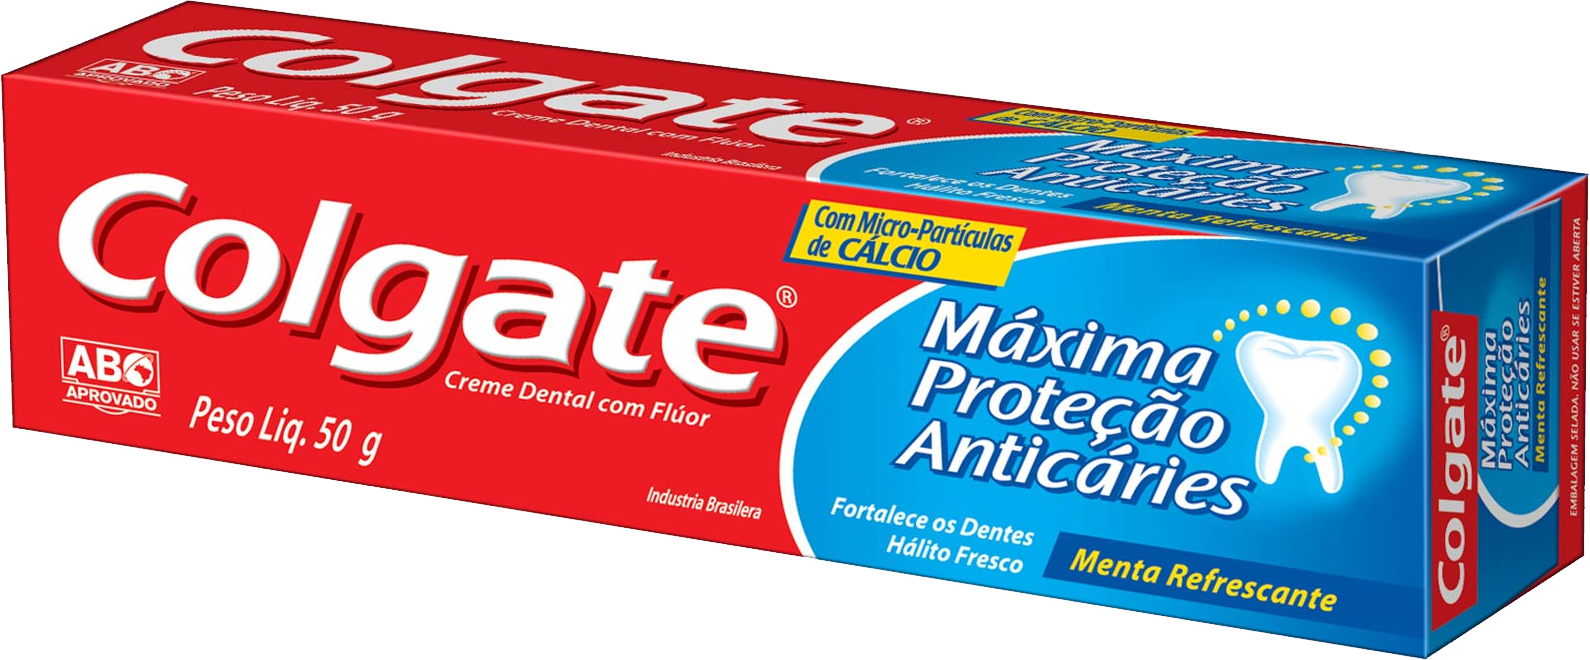 Toothpaste HD PNG - 118254